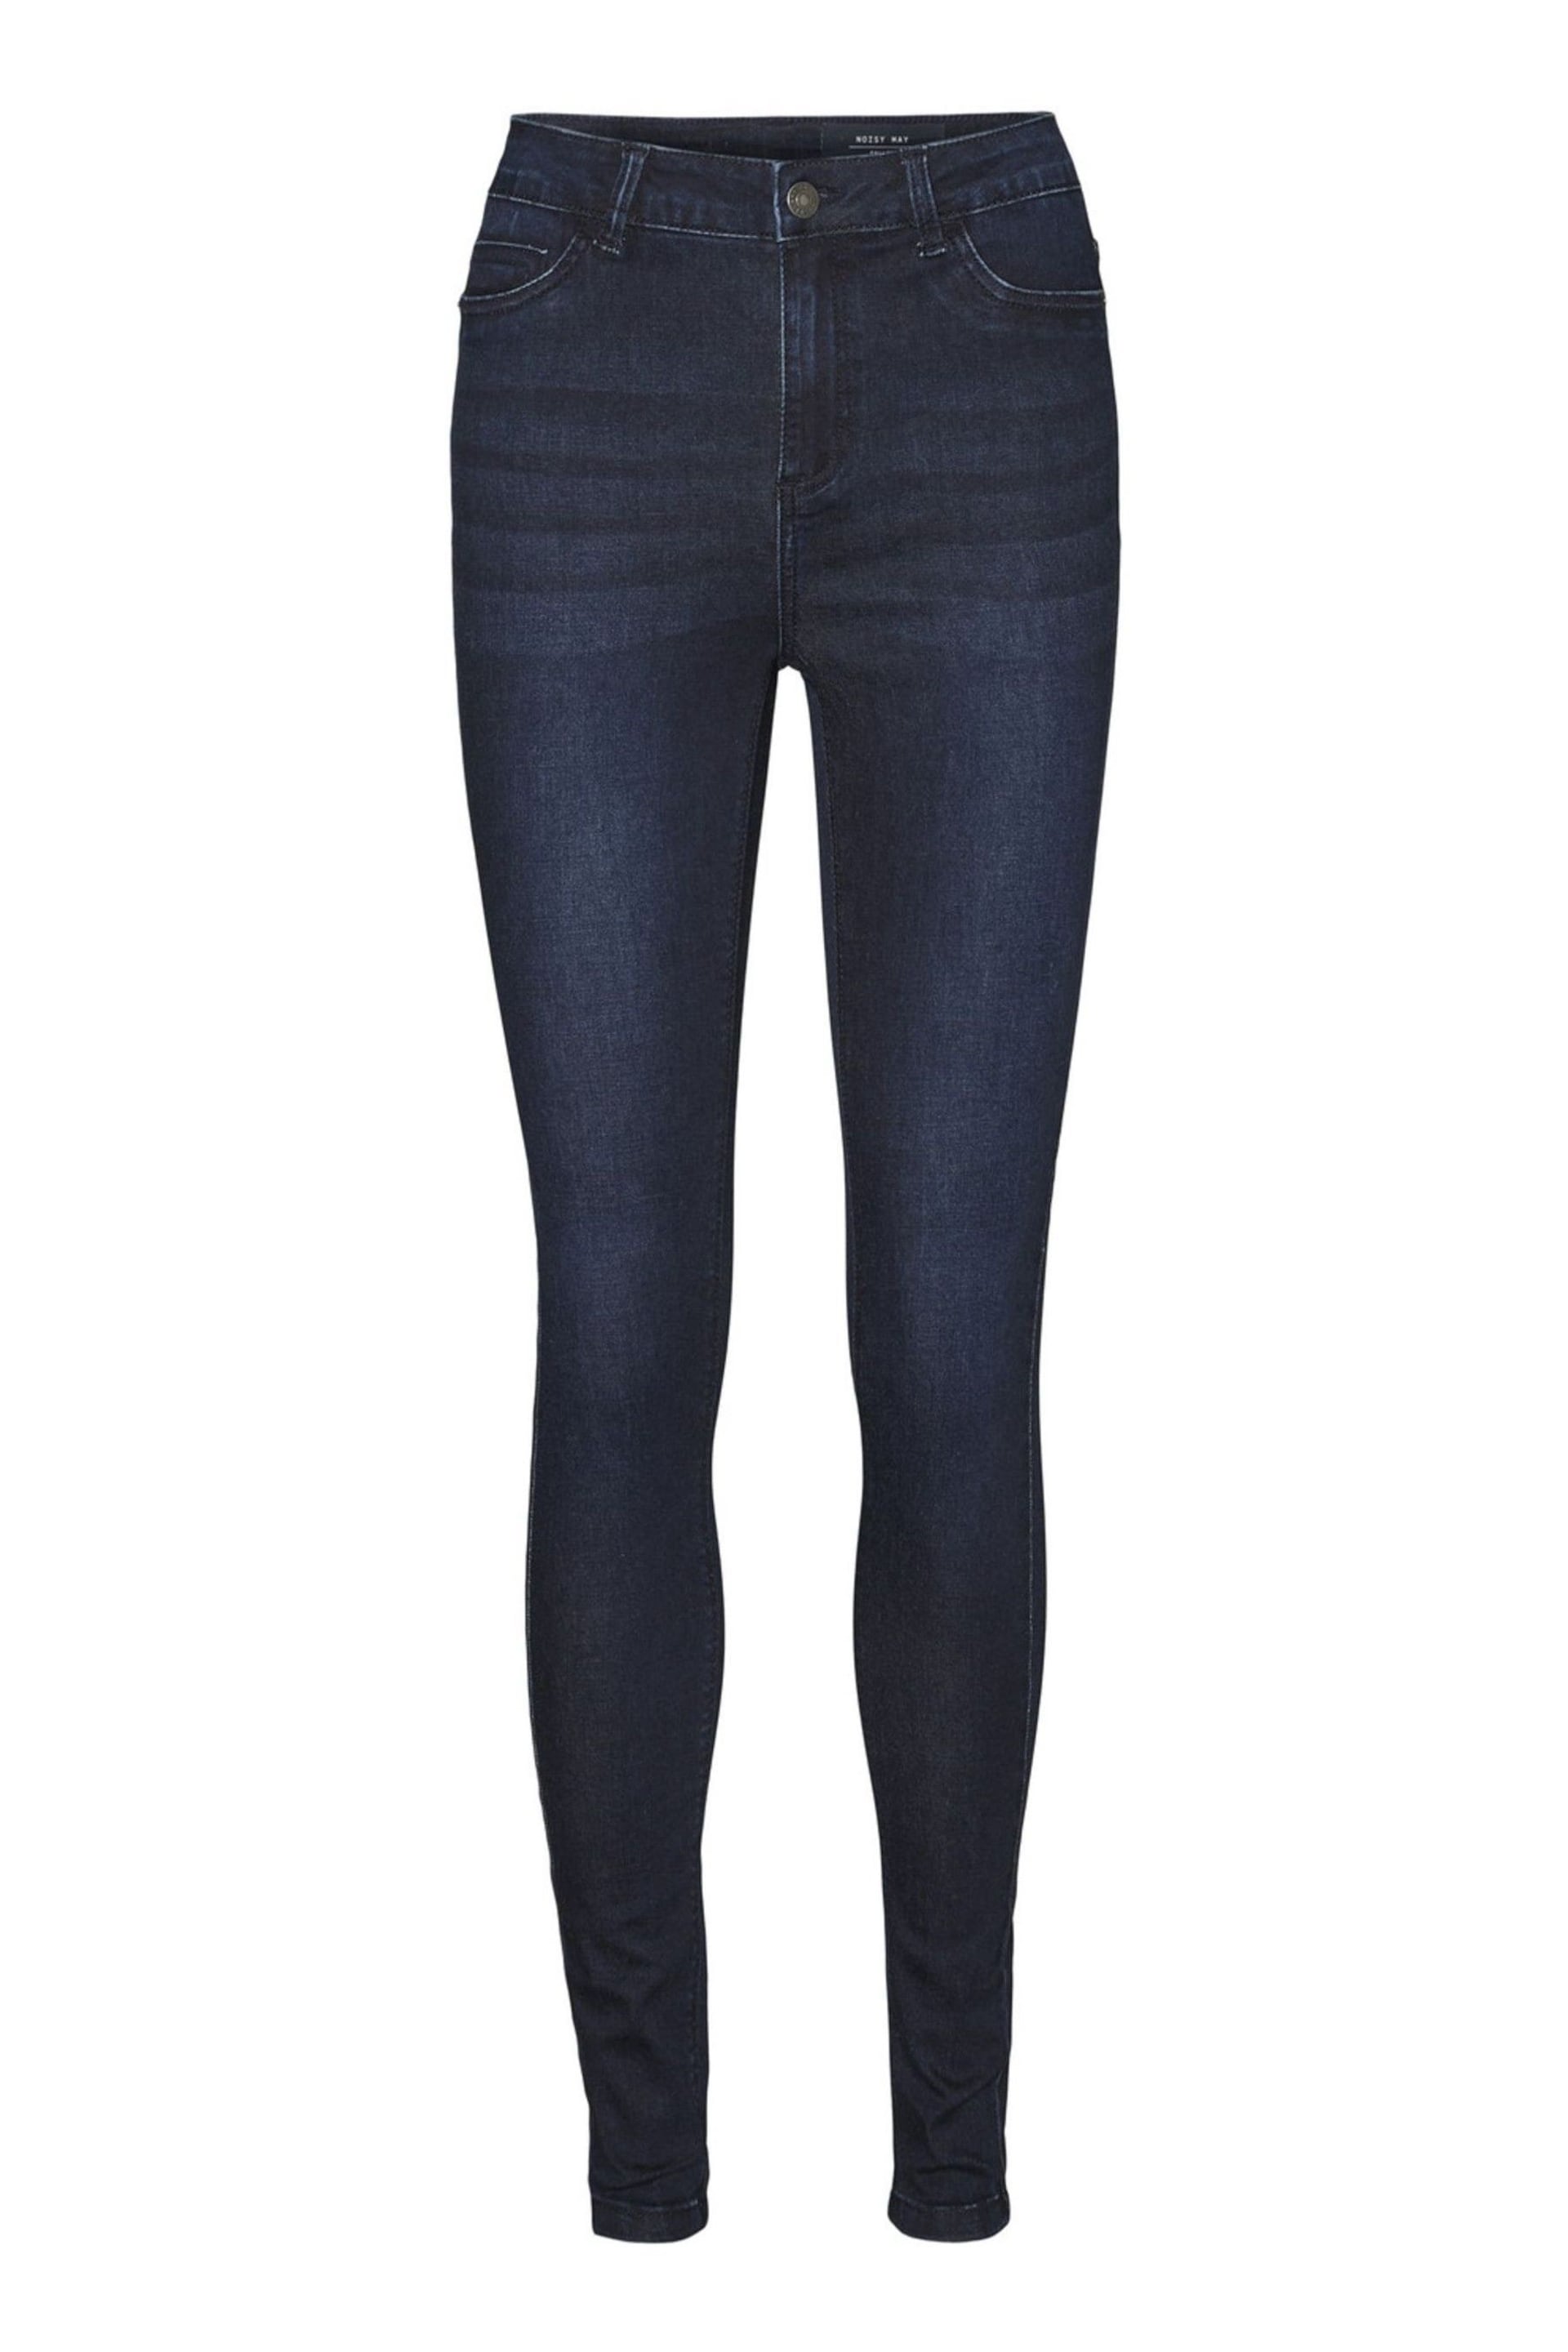 NOISY MAY blue denim High Waisted Skinny Jeans - Image 5 of 5